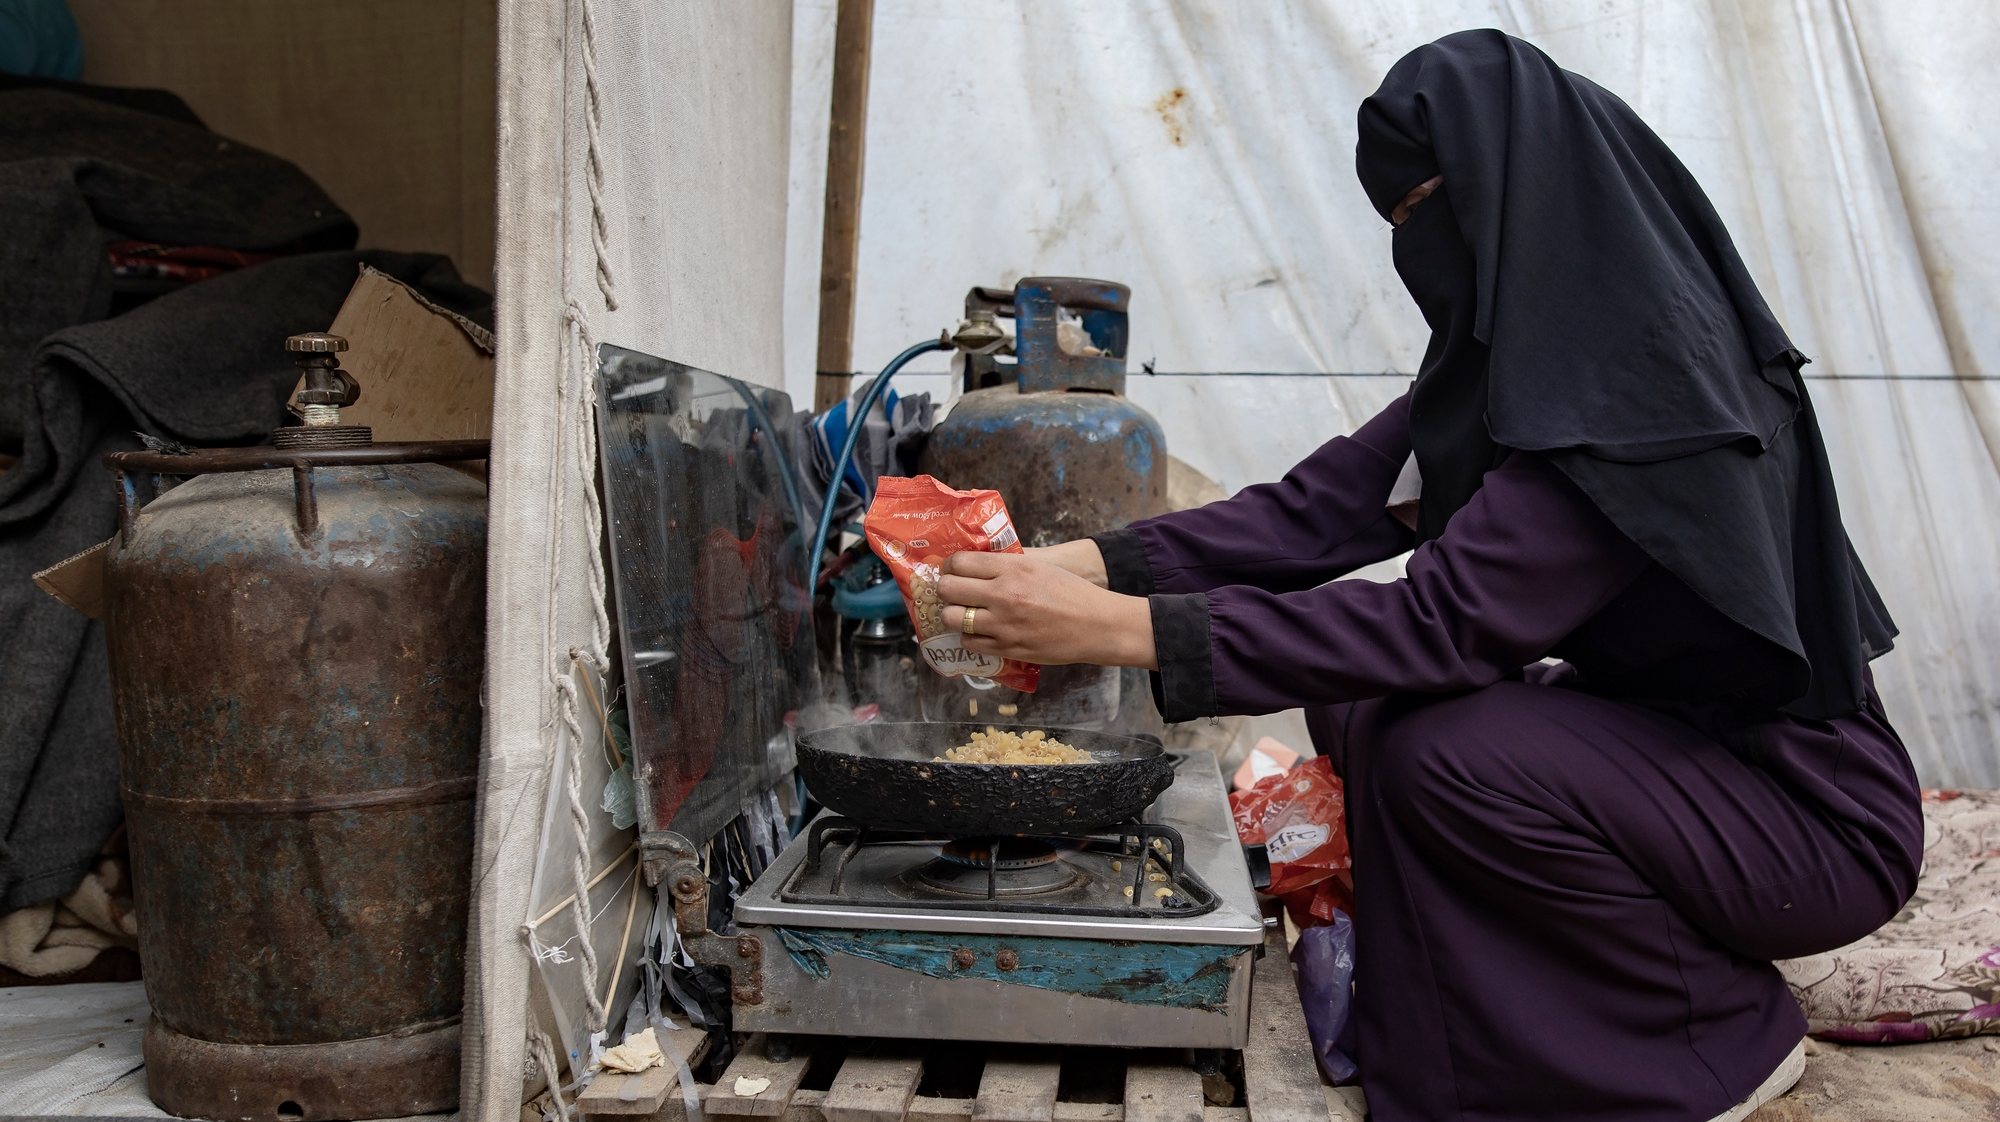 epa11235176 Internally displaced Palestinian Hanan Al-Shafi&#039;i &#039;Umm Adl&#039;, 30, a mother to nine children, cooks on a stove, at their shelter in Khan Yunis, southern Gaza Strip, 21 March 2024. Hanan said that she and her children have been displaced twice within Khan Yunis since the outbreak of the conflict. With no access to fresh water, her children walk long distances to fetch water to meet their daily needs of 40 liters of clean water for drinking and cooking and 70 liters for washing and personal hygiene. According to the United Nations, the majority of people in the Gaza Strip face dire water and sanitation conditions as WASH (water, sanitation, hygiene) facilities that provide basic services have been damaged or destroyed. Since 07 October 2023, up to 1.9 million people have been displaced throughout the Gaza Strip, according to UNRWA, which added that most civilians in Gaza are in &#039;desperate need of humanitarian assistance and protection&#039;. World Water Day, which is held annually on 22 March, focuses on the importance of global access to safe and clean water. This year&#039;s theme is &#039;Leveraging Water for Peace&#039;.  EPA/HAITHAM IMAD